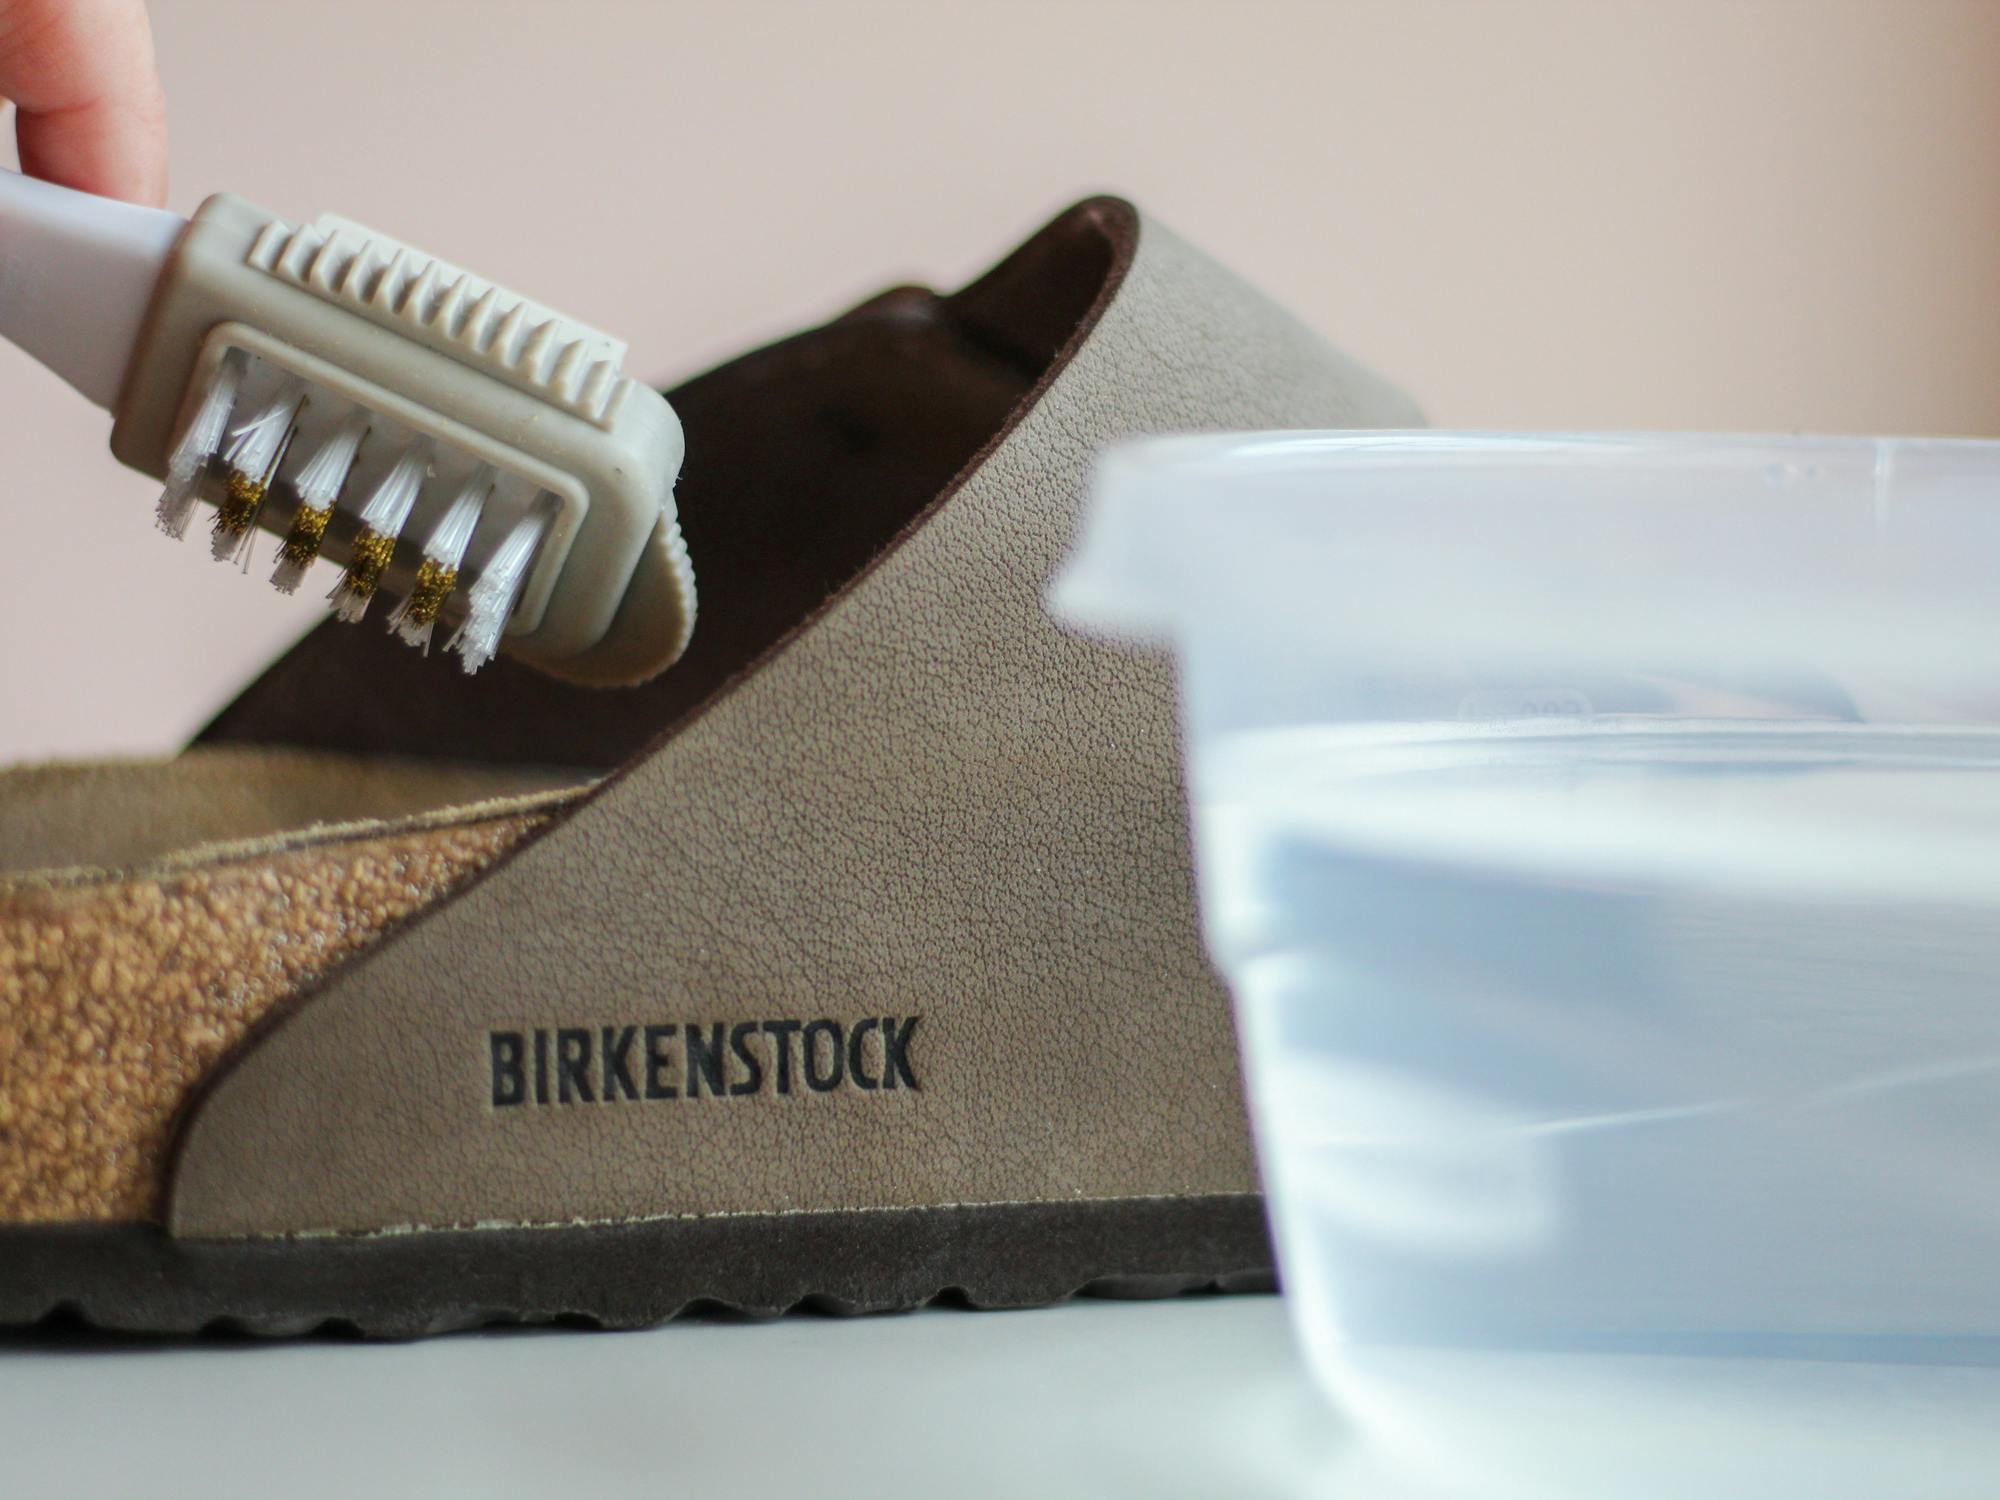 a person cleaning the footbed of Birkenstocks with a soft brush and water solution